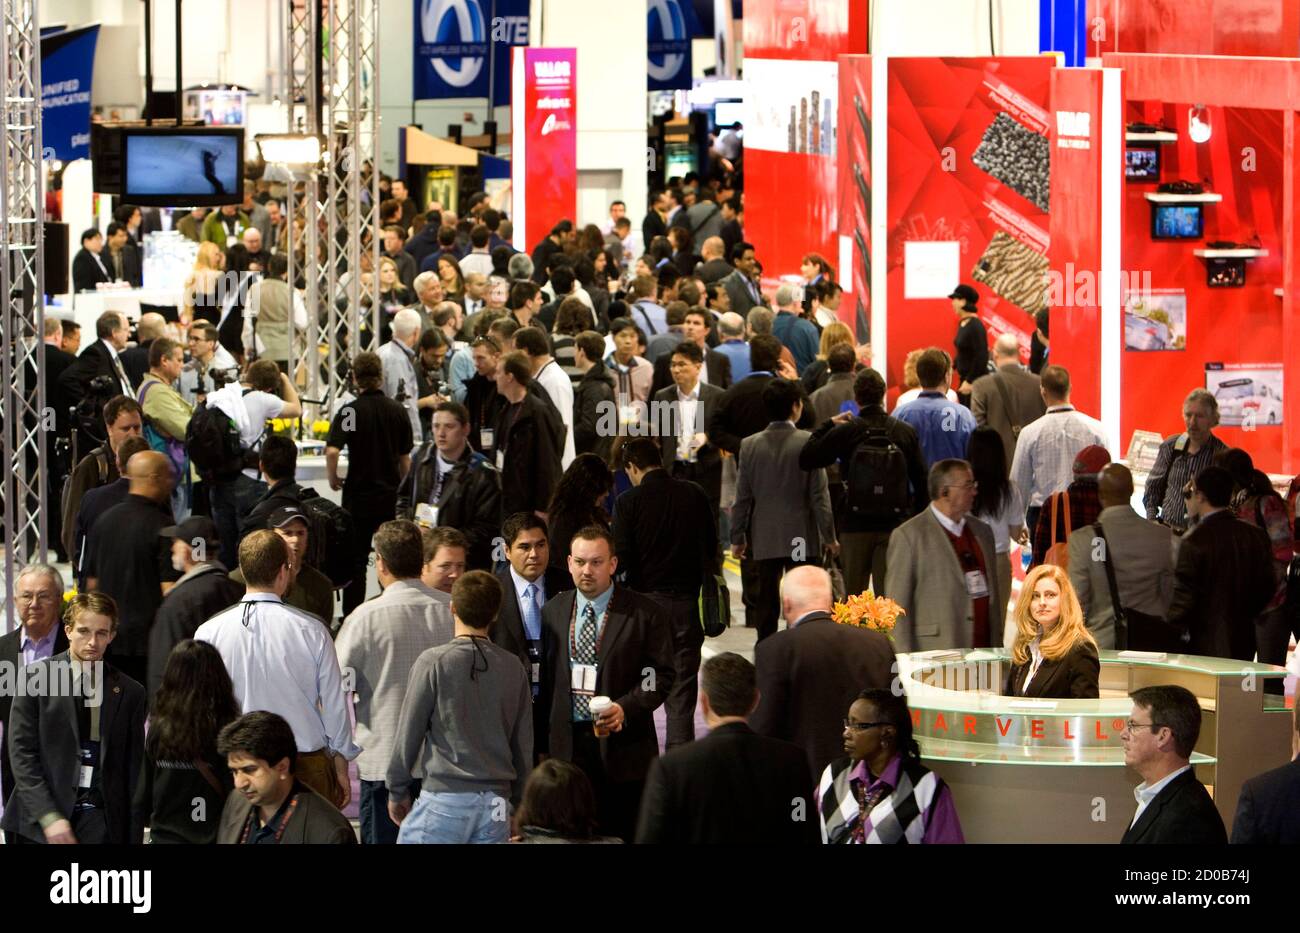 Visitors crowd an aisle on the trade show floor during the 2011 International Consumer Electronics Show (CES) in Las Vegas, Nevada January 7, 2011. The annual Consumer Electronics Show in Las Vegas from Jan. 6-9 showcases the tablets, 3D- and Internet-enabled TVs expected to make the biggest splash in 2011. The battle for recession-weary consumers will pit Samsung Electronics, Sony Corp, LG Electronics, Google Inc, Netflix and Apple Inc against each other, all fighting to make their technology the standard.    REUTERS/Steve Marcus (UNITED STATES - Tags: BUSINESS) Stock Photo